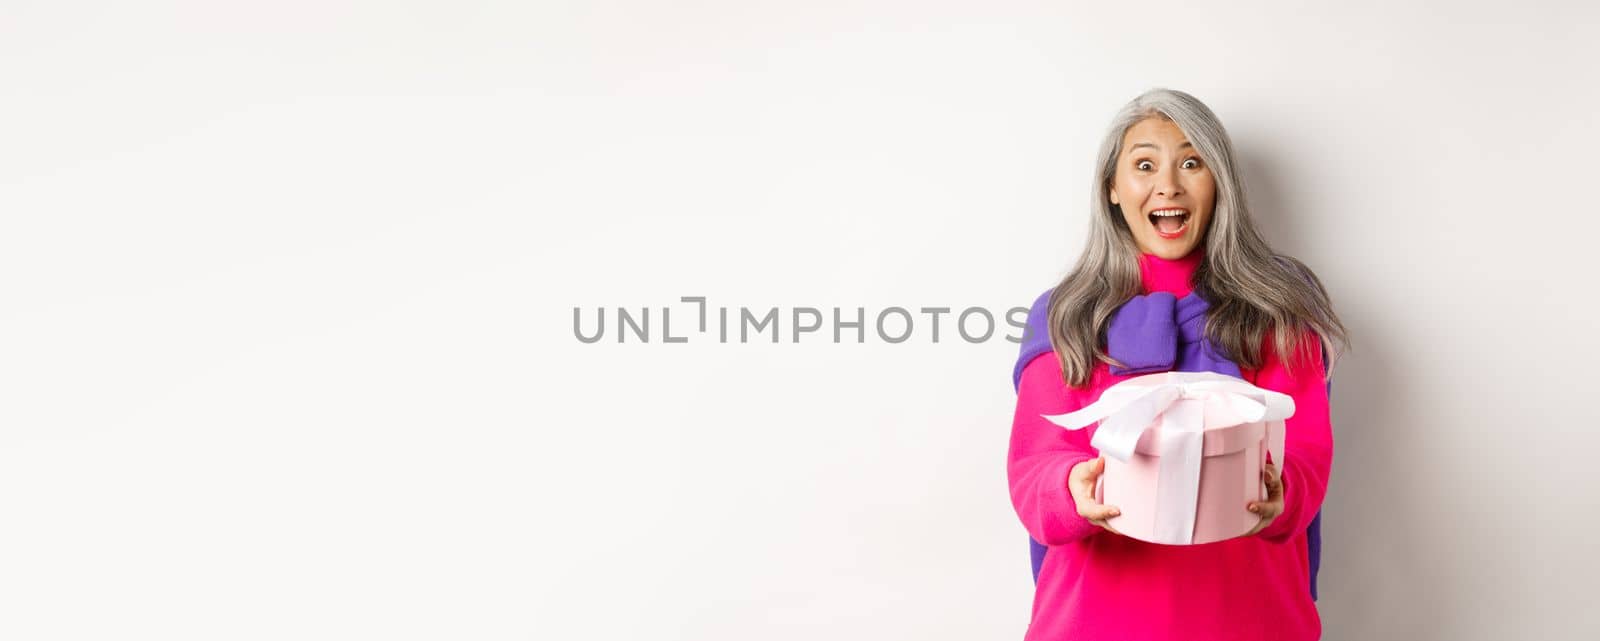 Surprised senior asian woman receiving valentines day gift and smiling amazed, holding present box, standing over white background.